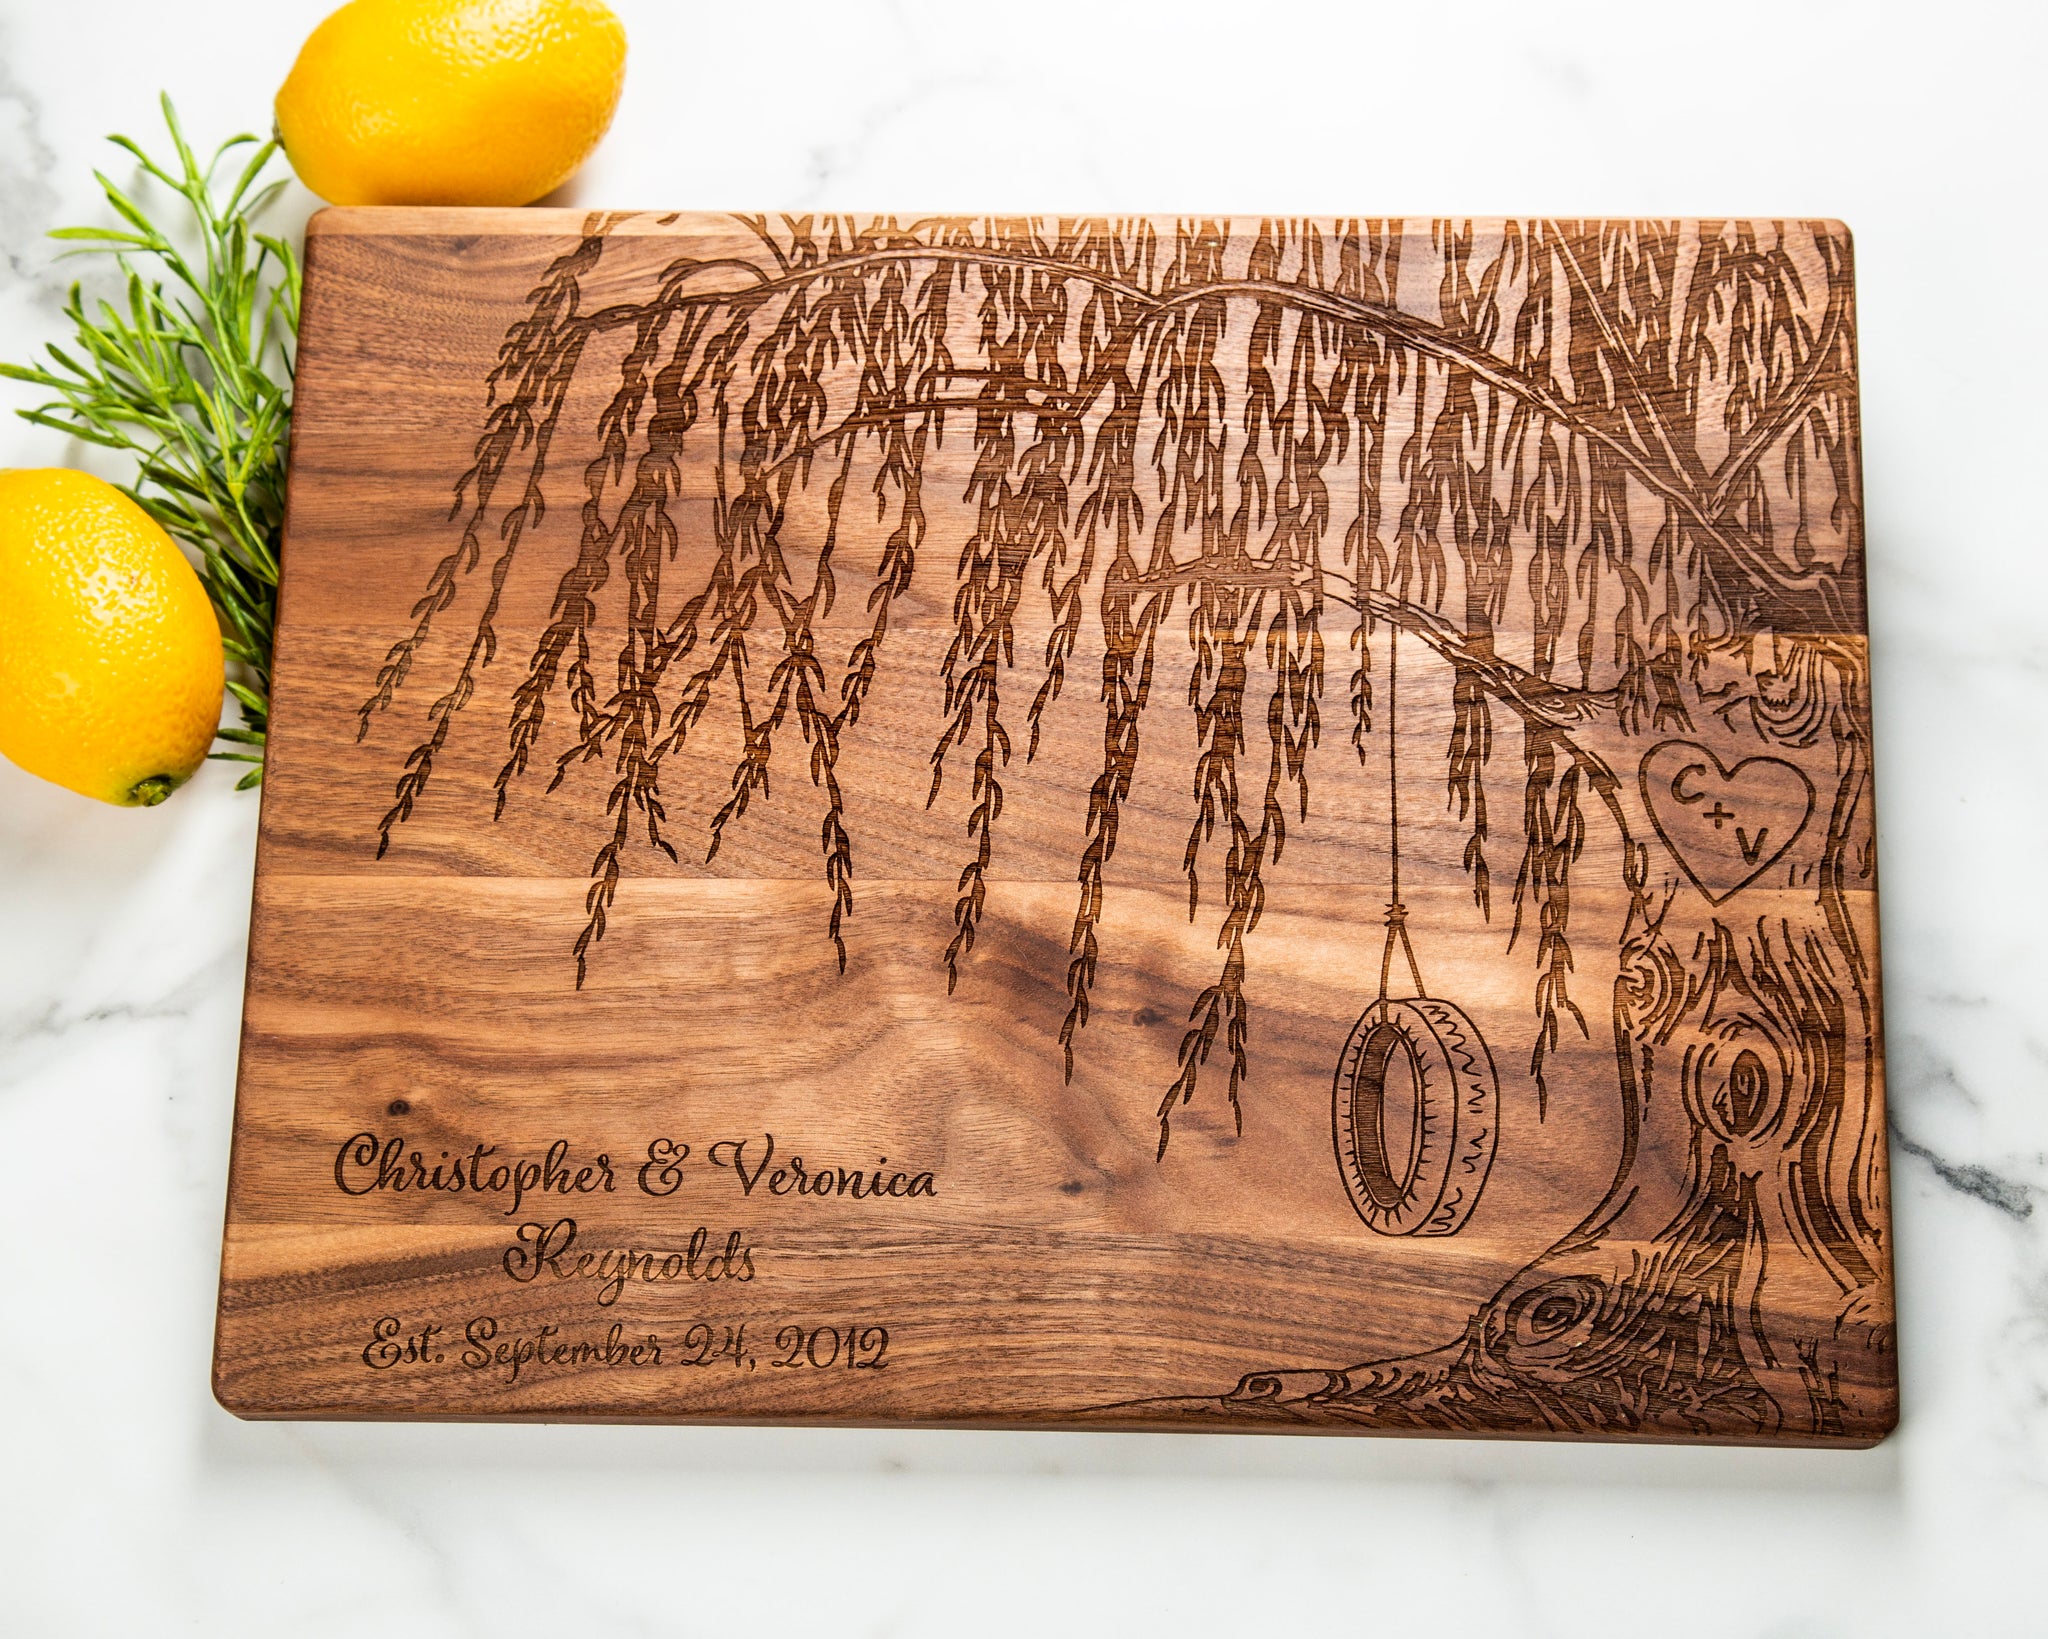 Personalized Cutting Board Laser Engraved